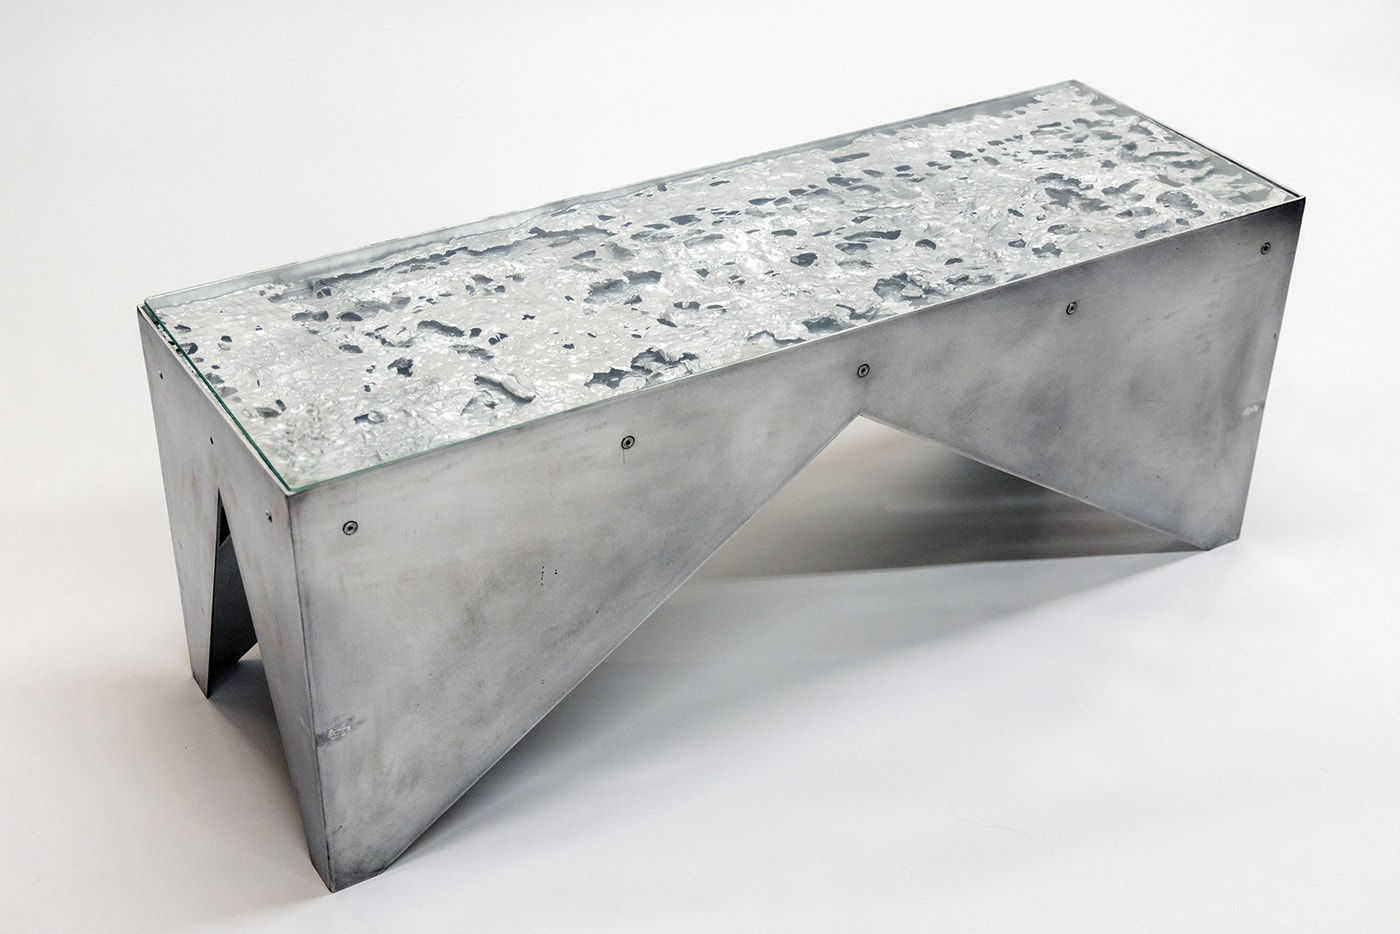 Meet Jamps – The Studio Making One-Offs From its own Scrap Metal 